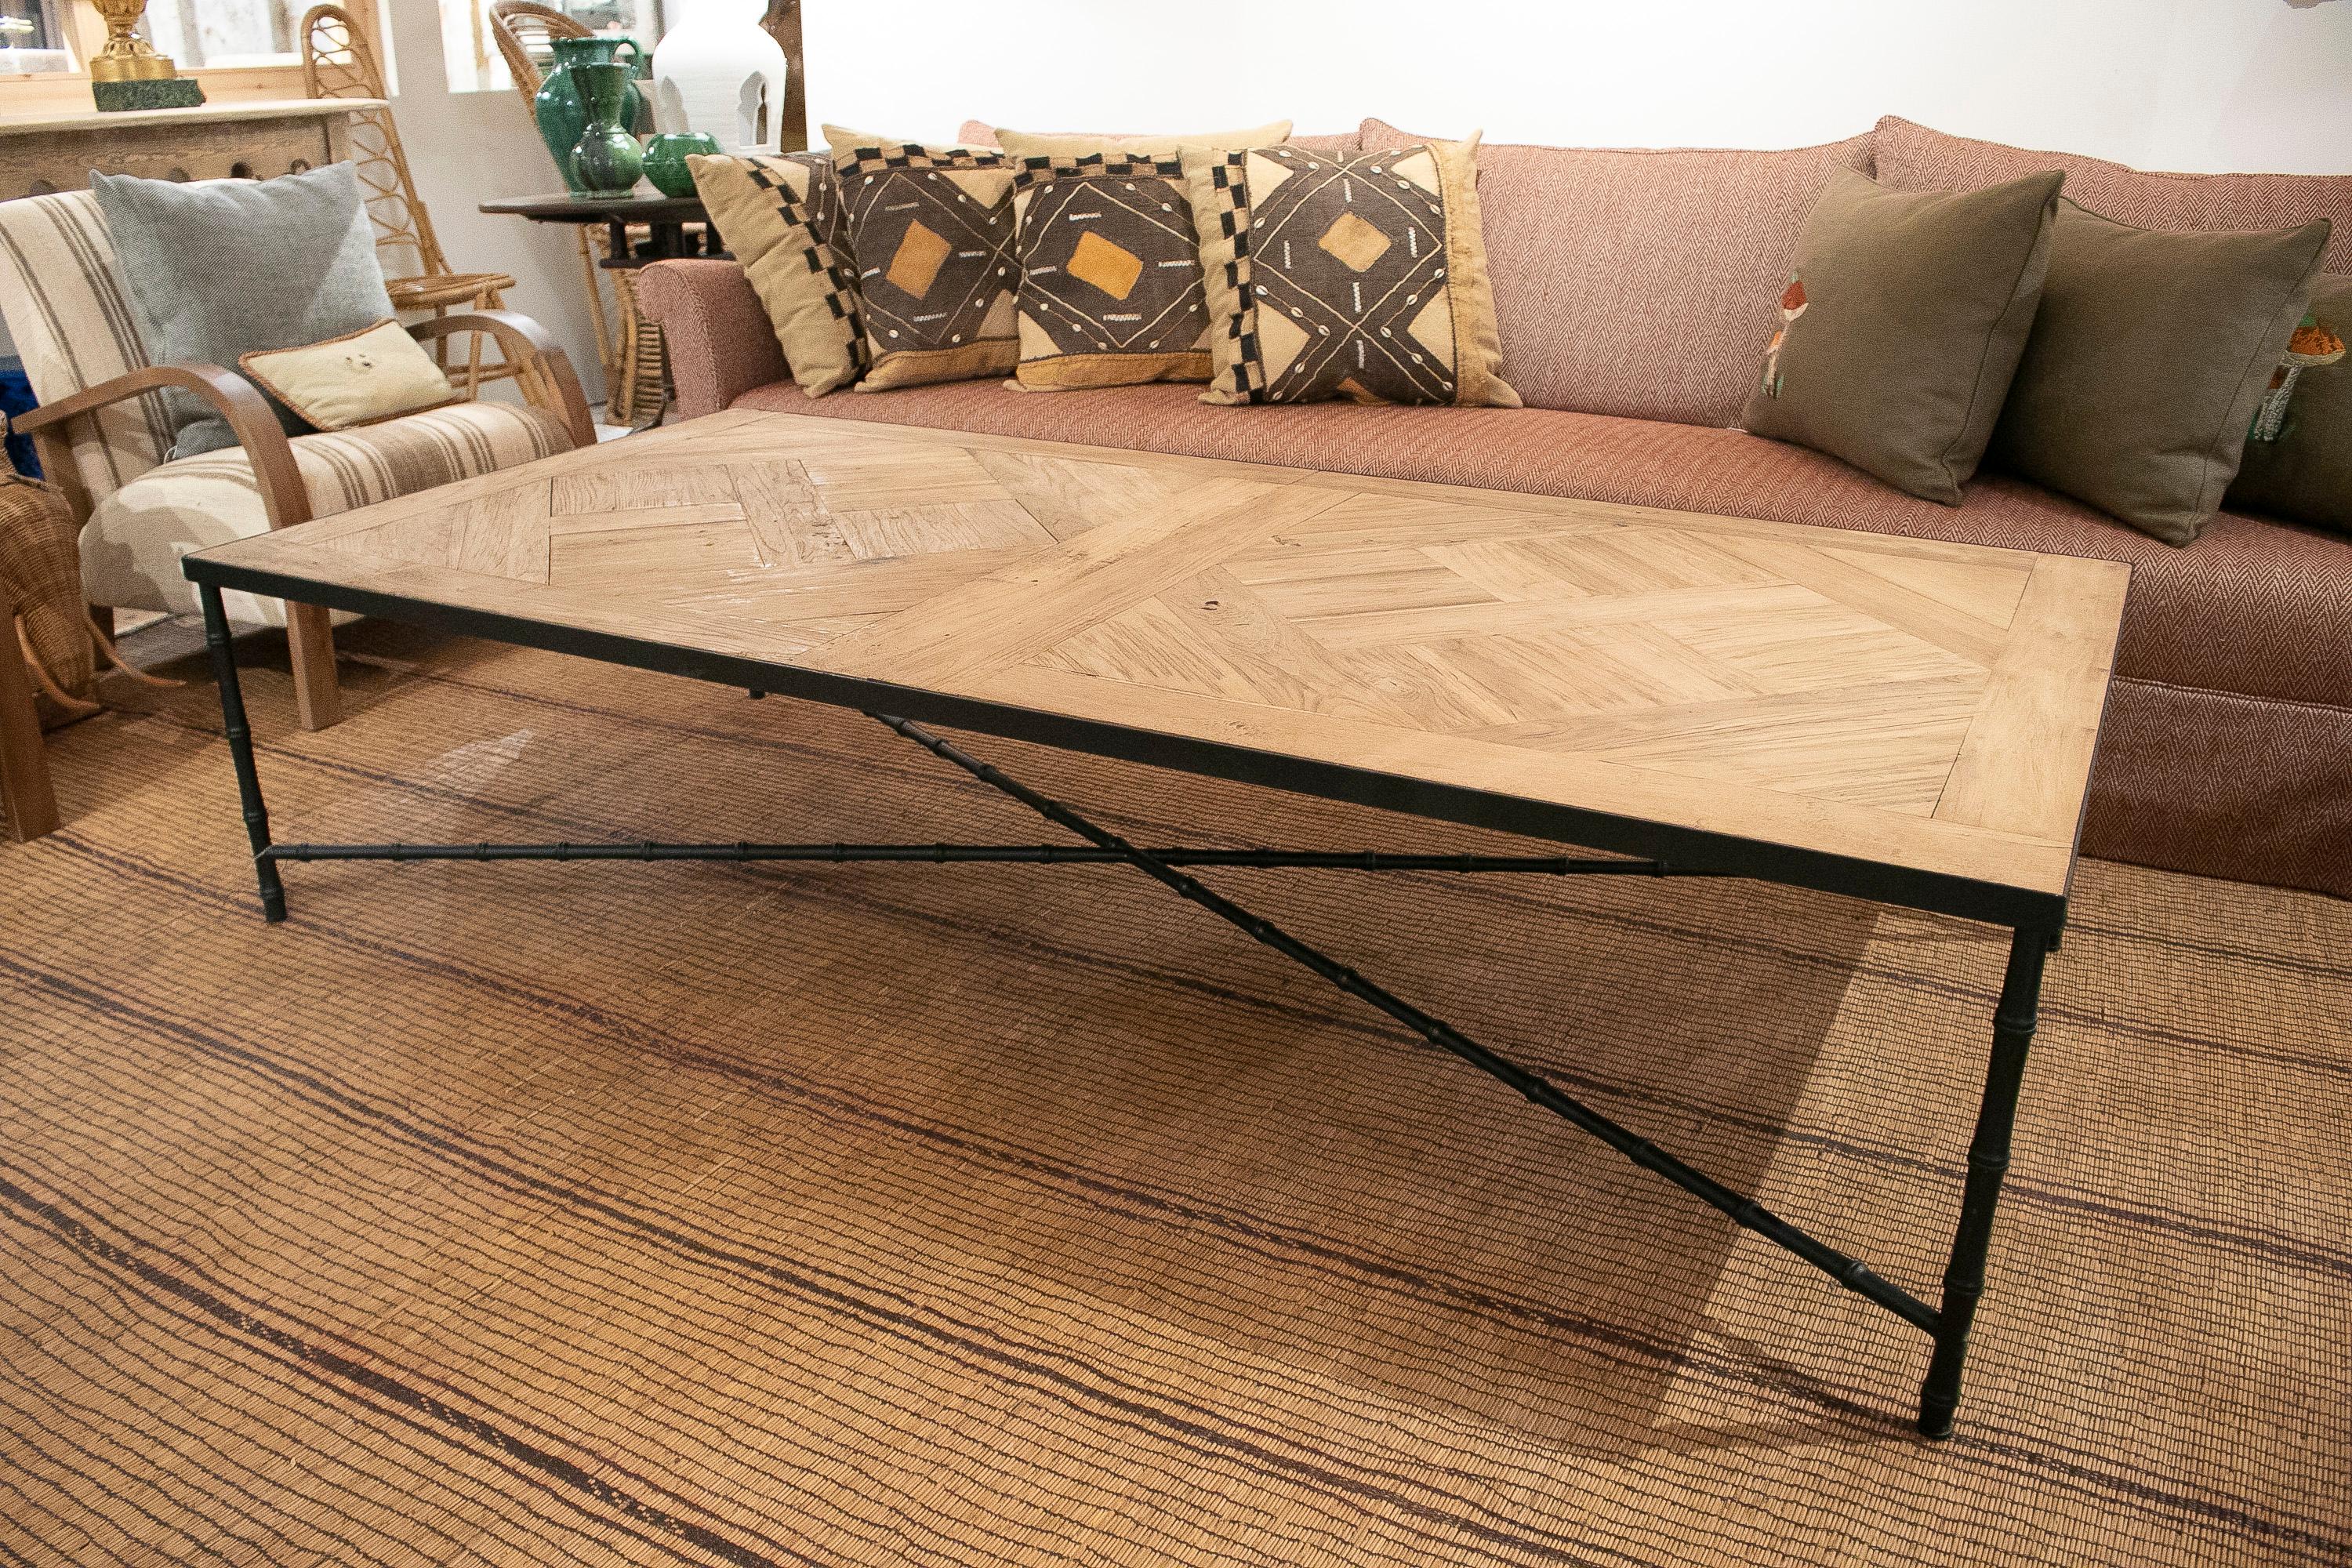 Rustic 1990s French iron coffee table with oak parquet top.